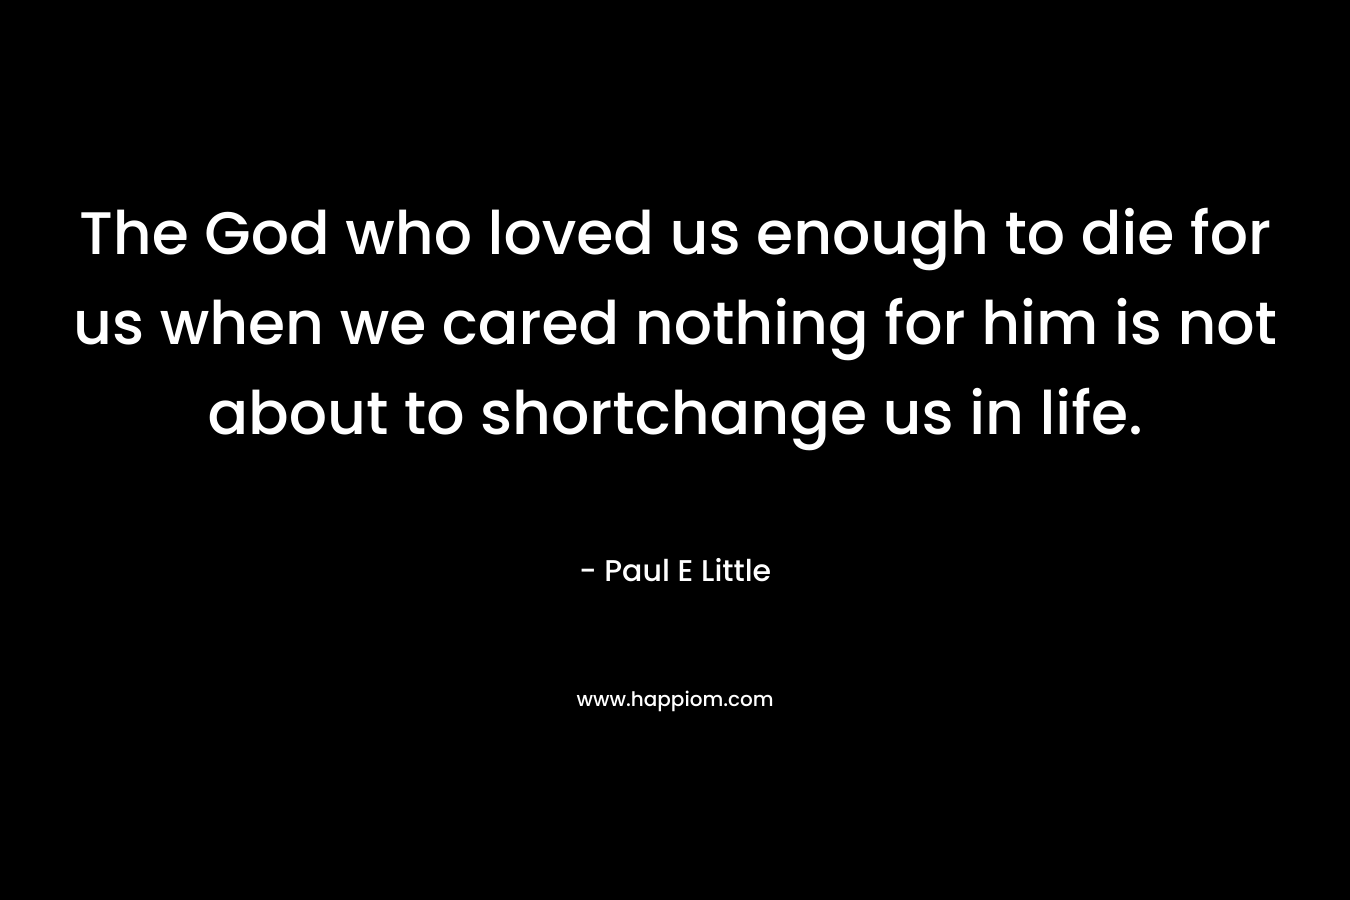 The God who loved us enough to die for us when we cared nothing for him is not about to shortchange us in life.